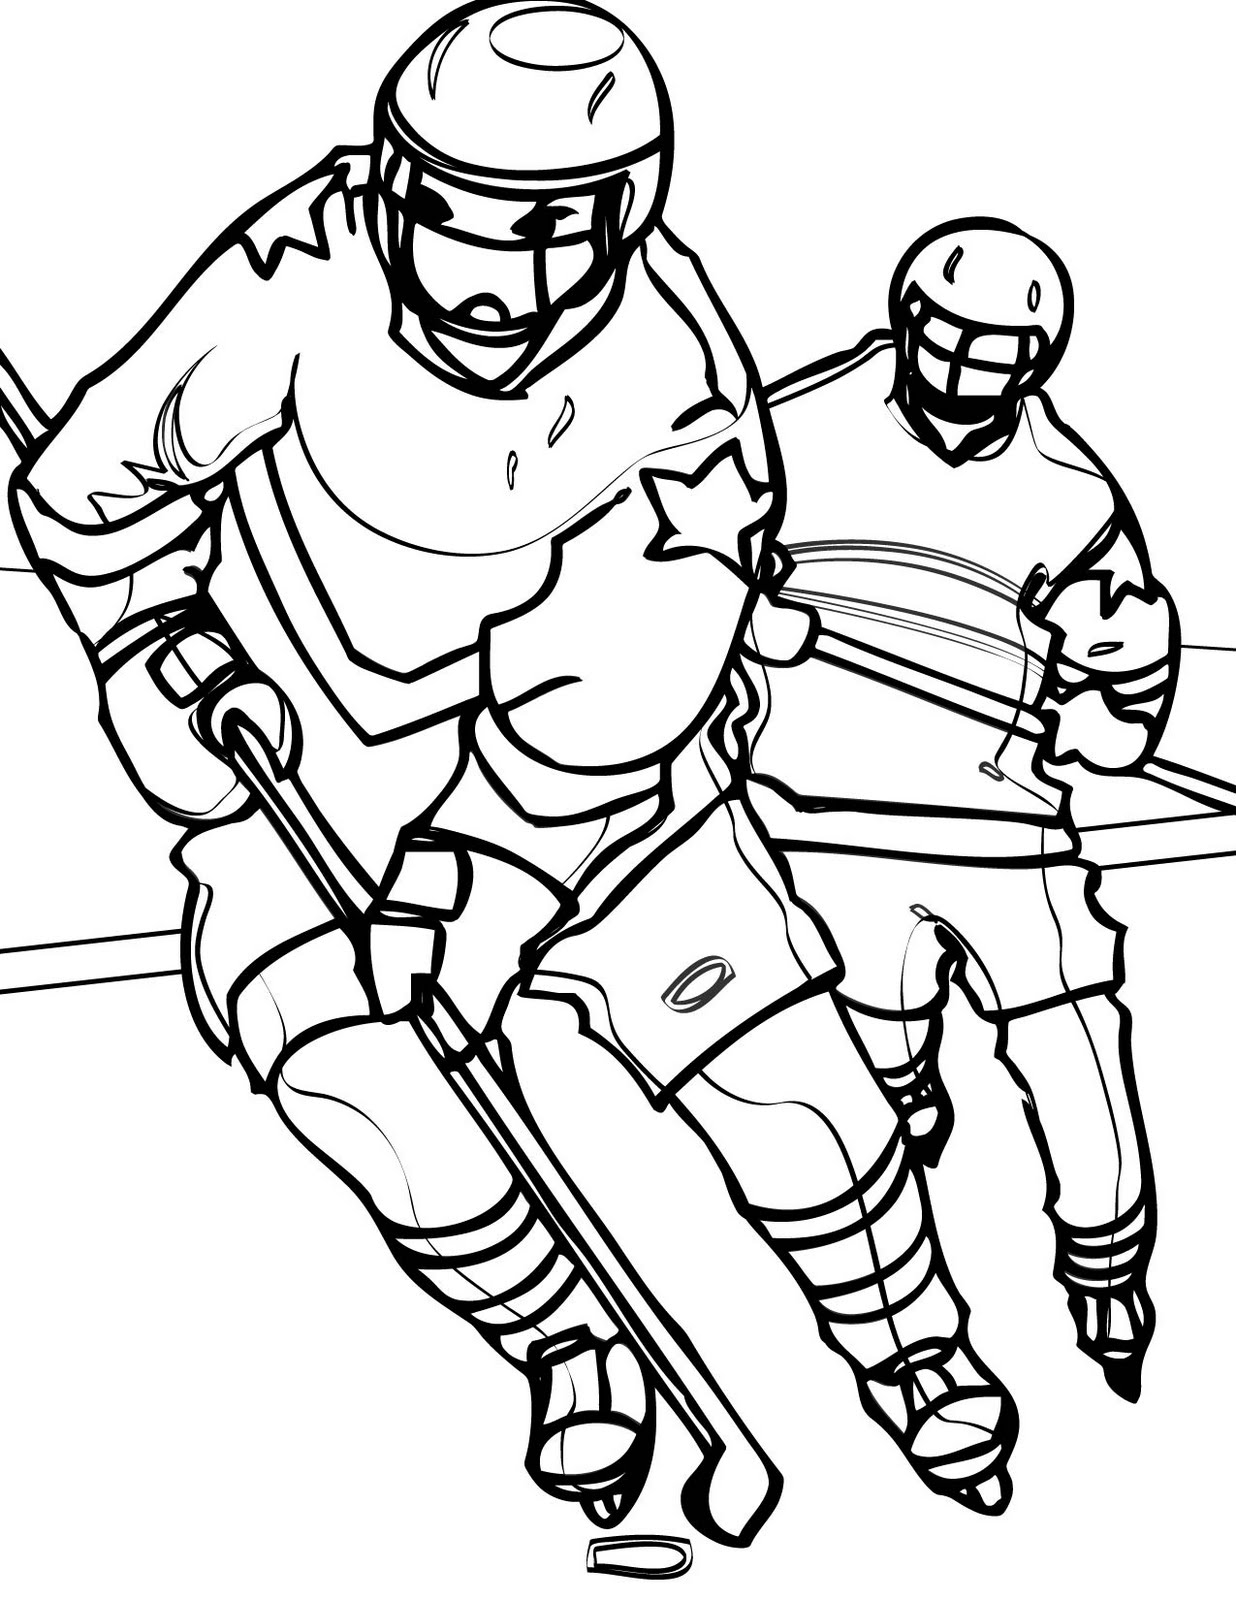 sports colouring sheets coloring pages coloring pages sports coloringinsta sports colouring sports sheets 